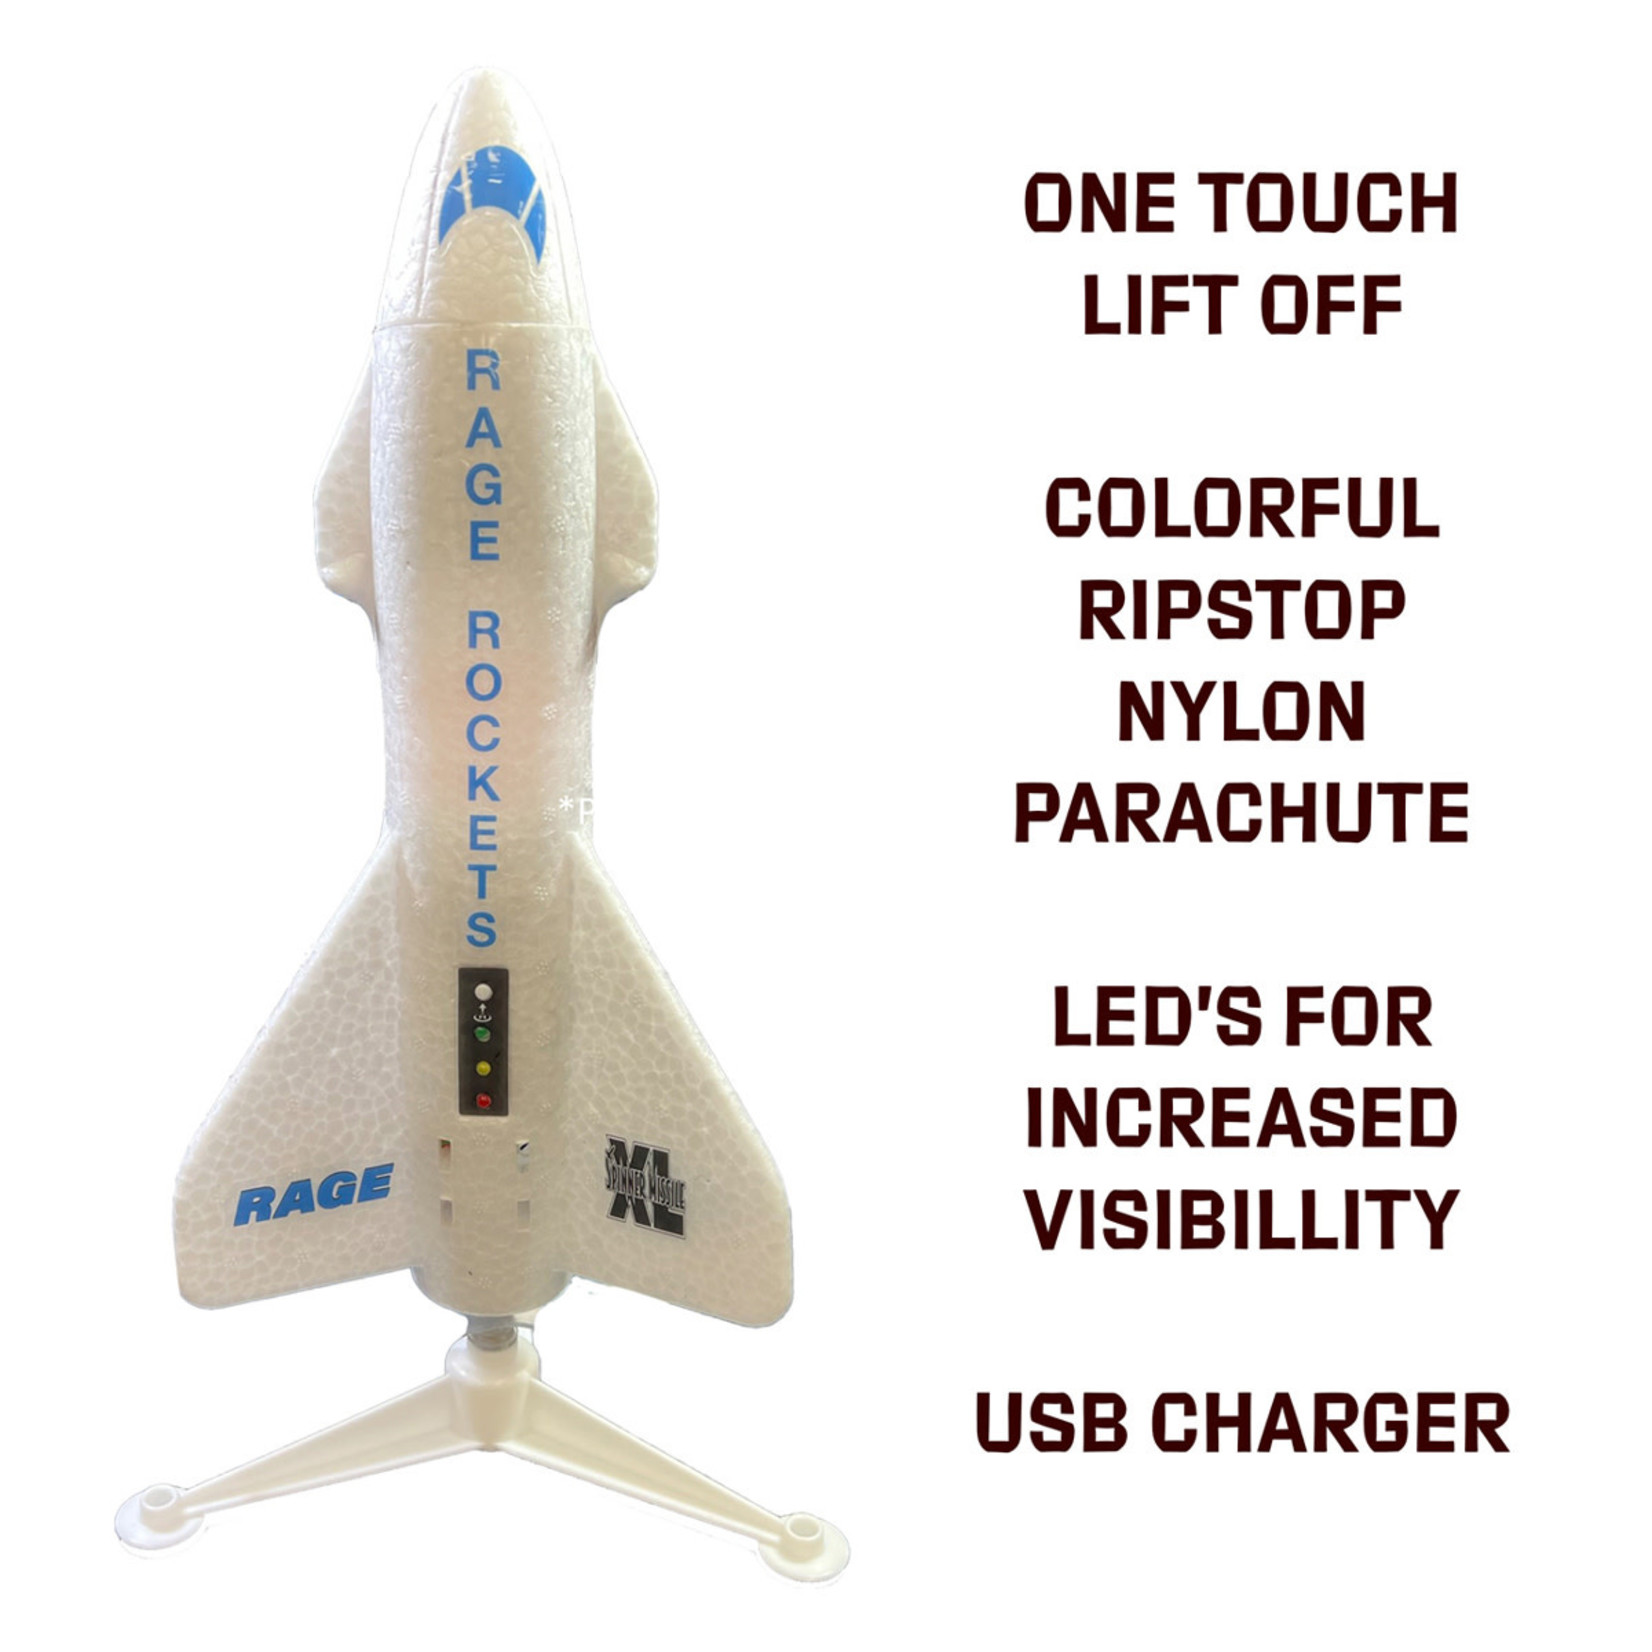 Rage R/C Spinner Missile XL Electric Free-Flight Rocket with Parachute & LEDs, White